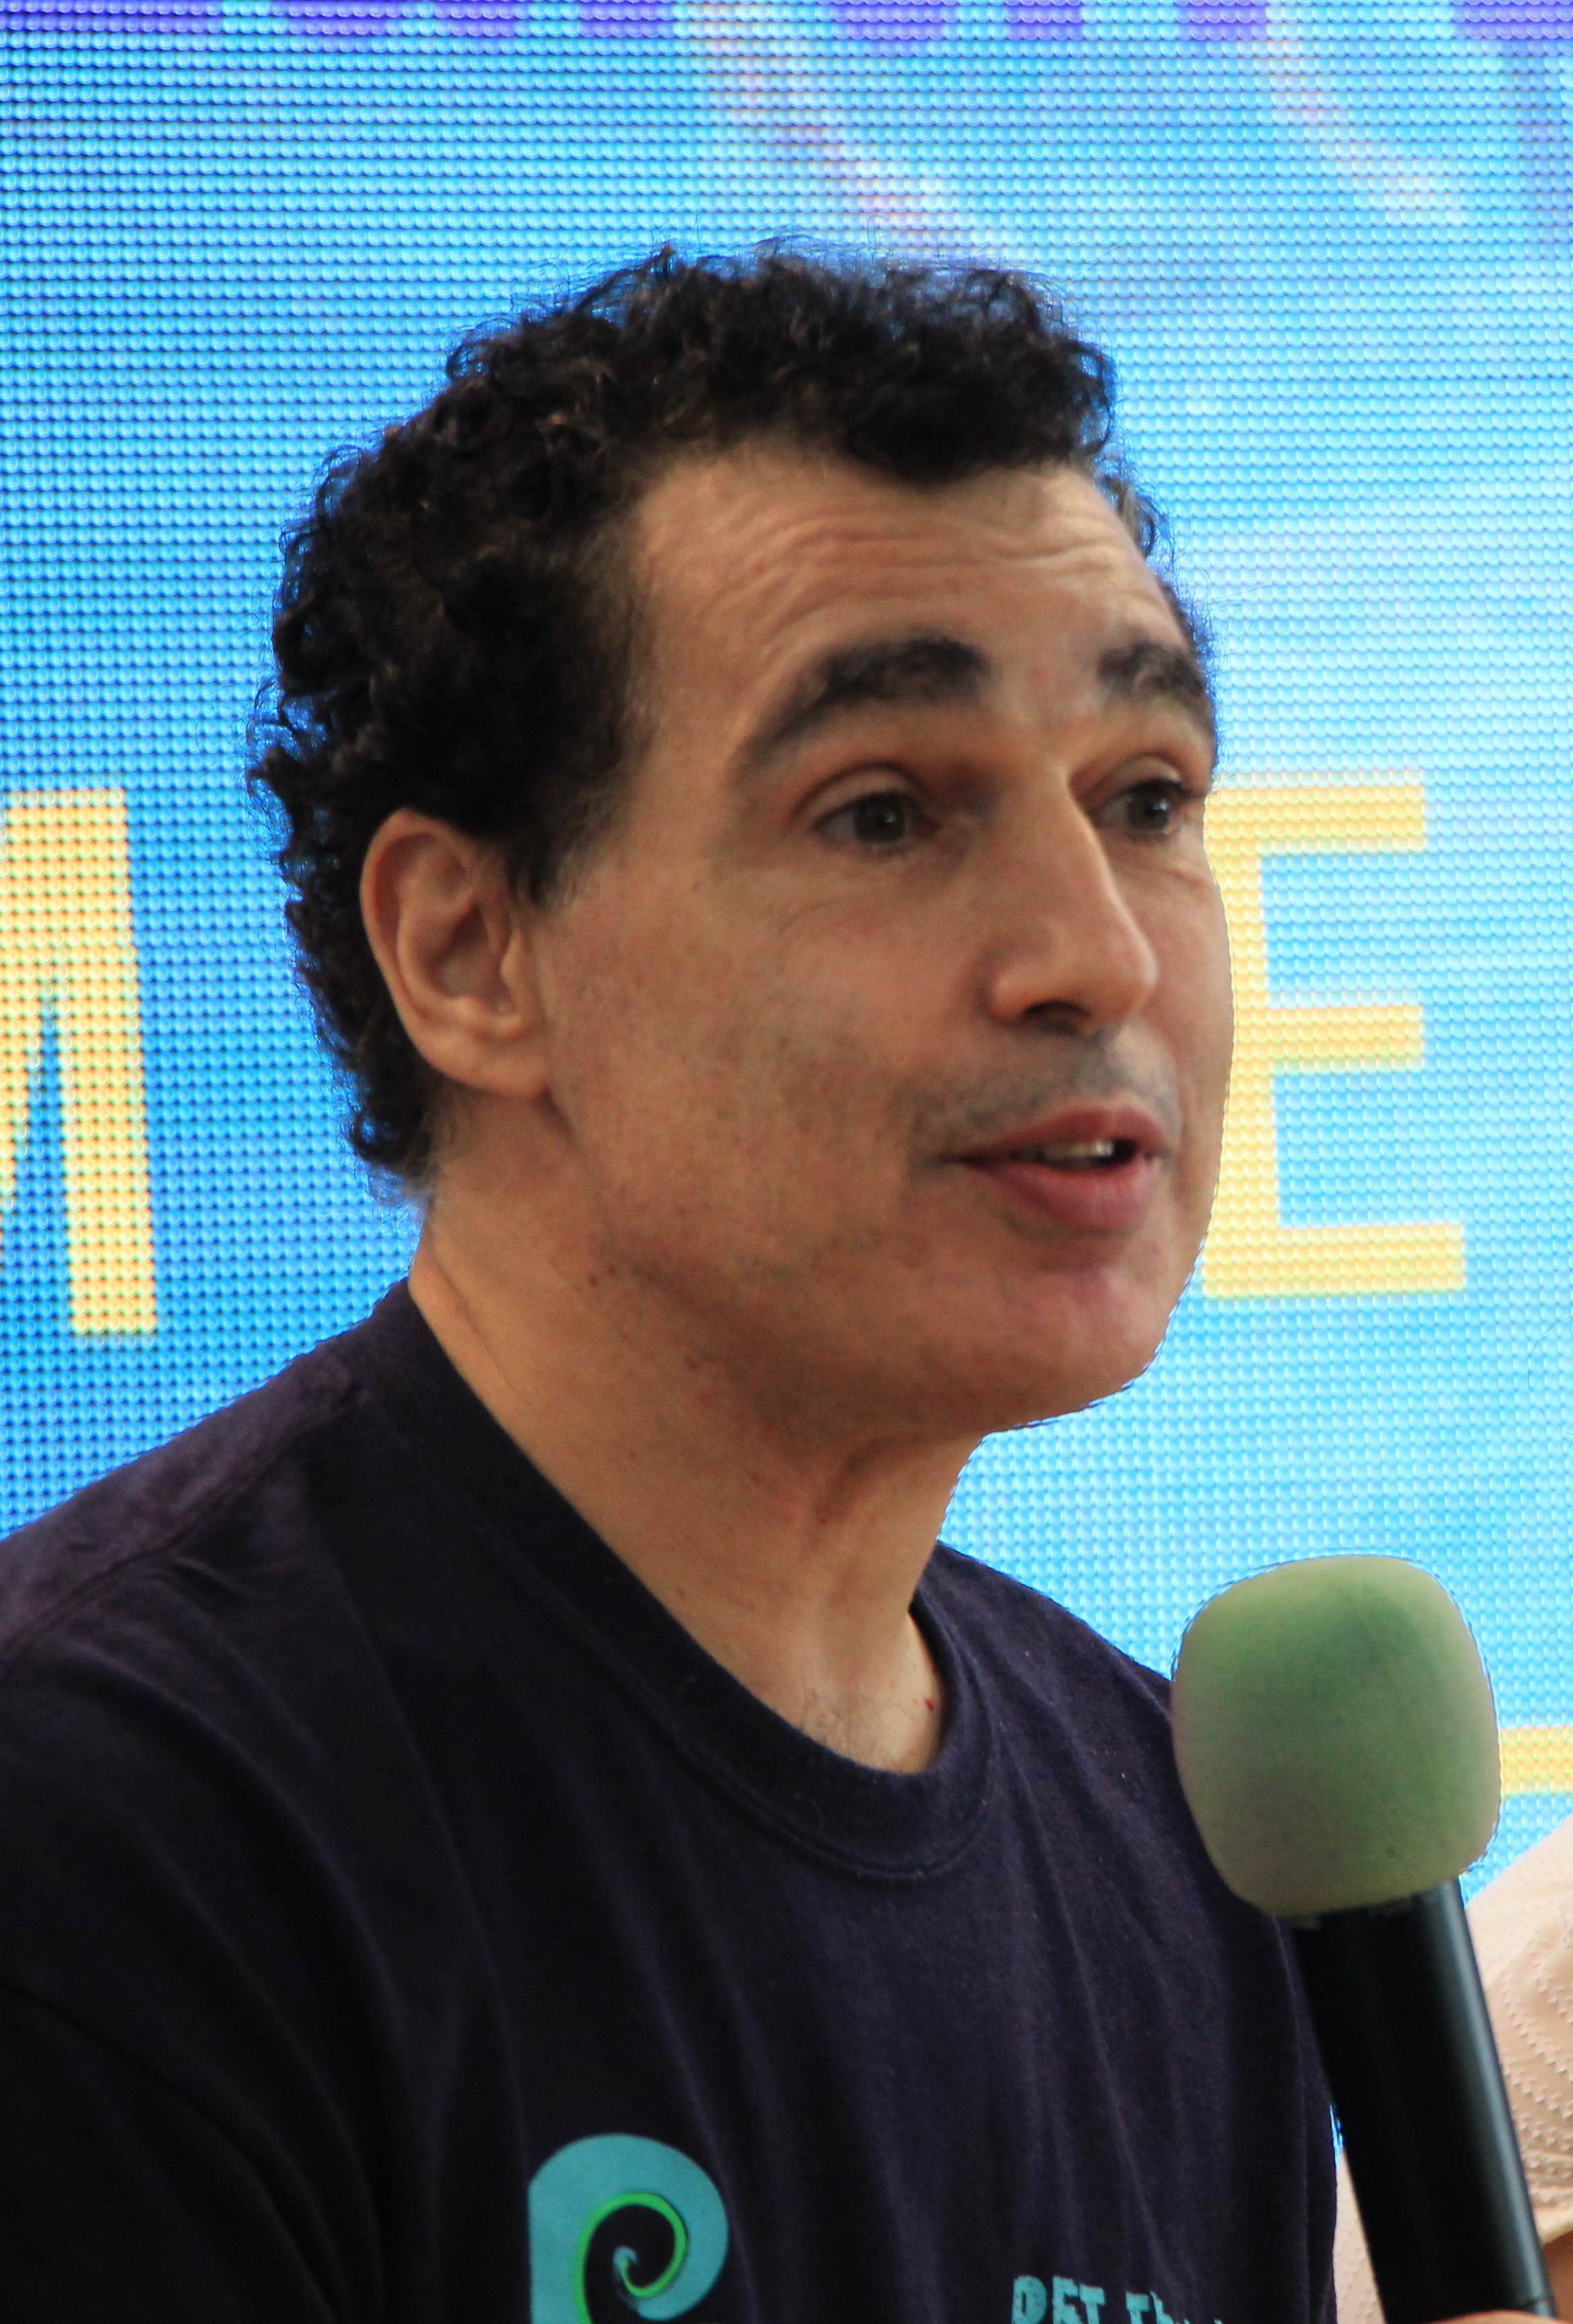 David Saiia, co-founder and CEO of Reuse Everything Institute, Inc (REII) speaks at an Earth Day event in Ho Chi Minh City on April 19, 2018. Photo: Dong Nguyen/Tuoi Tre News